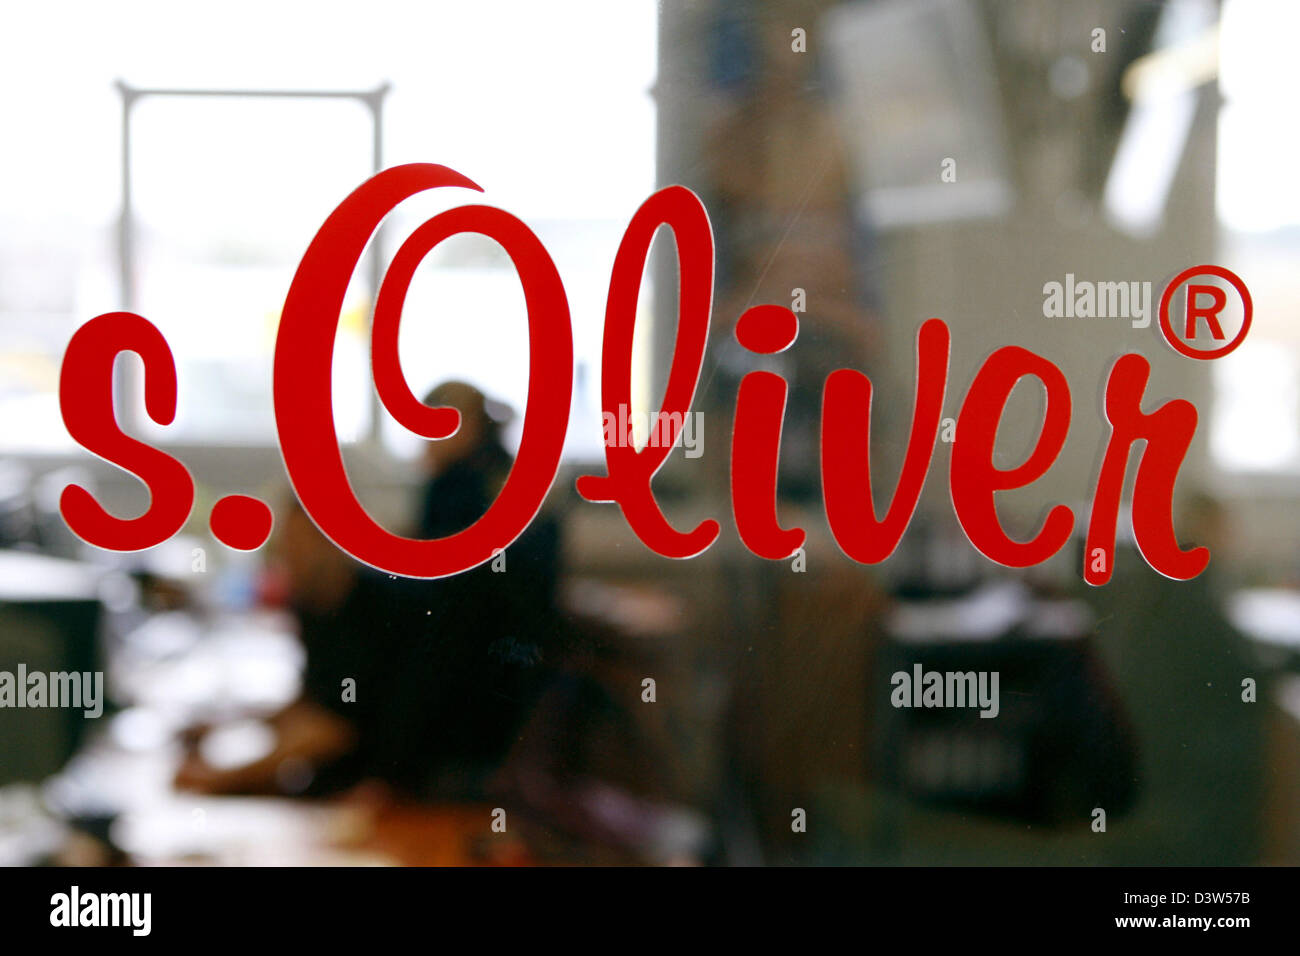 S oliver hi-res stock photography and images - Alamy